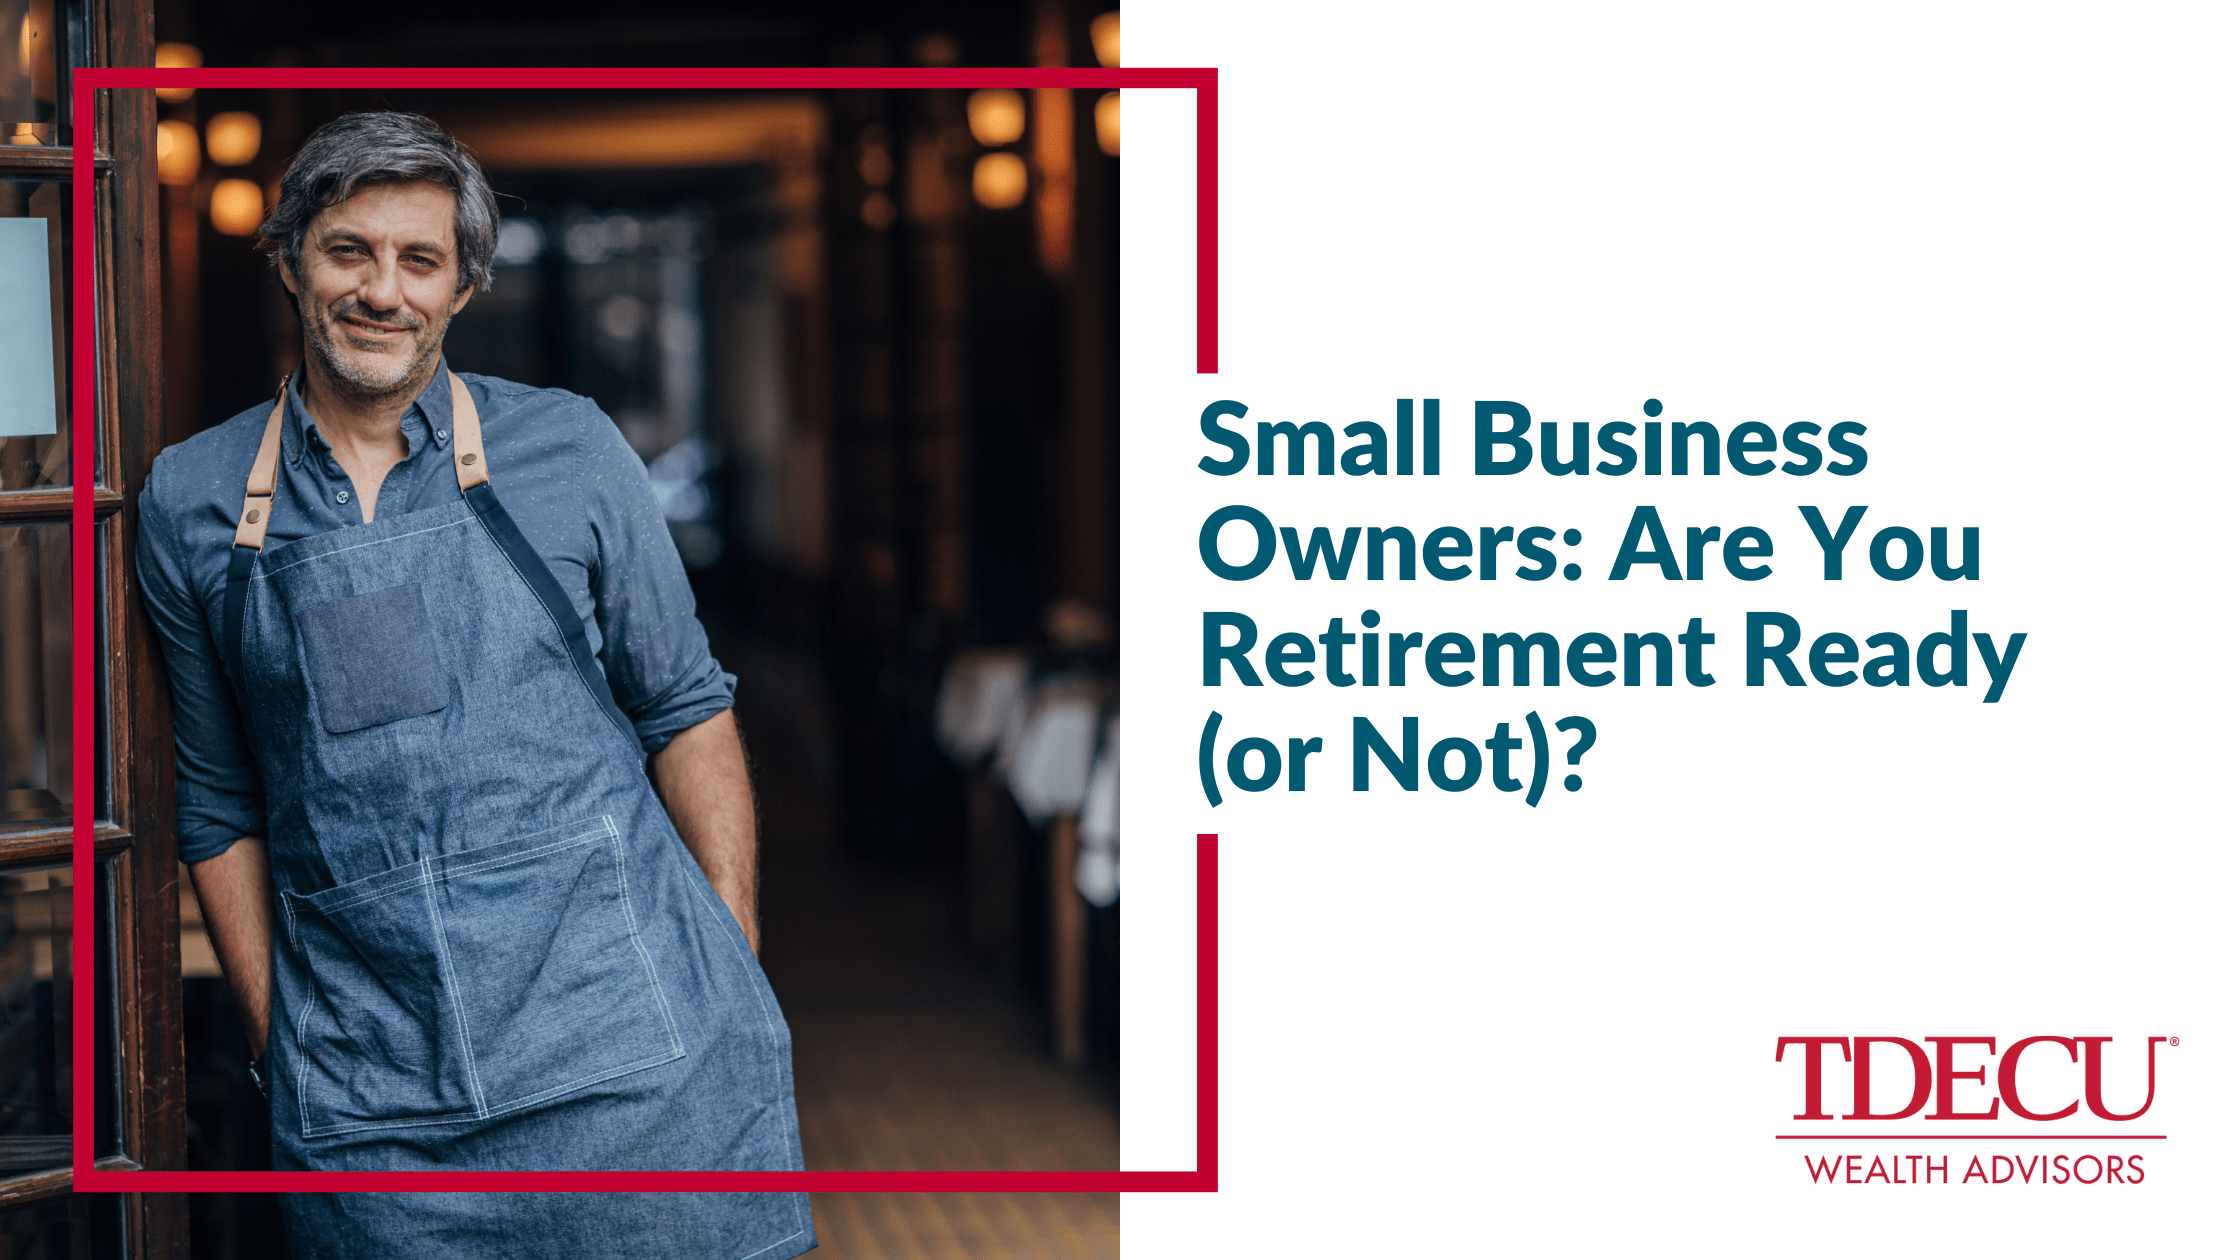 Small Business Owners: Are You Retirement Ready (or Not)?